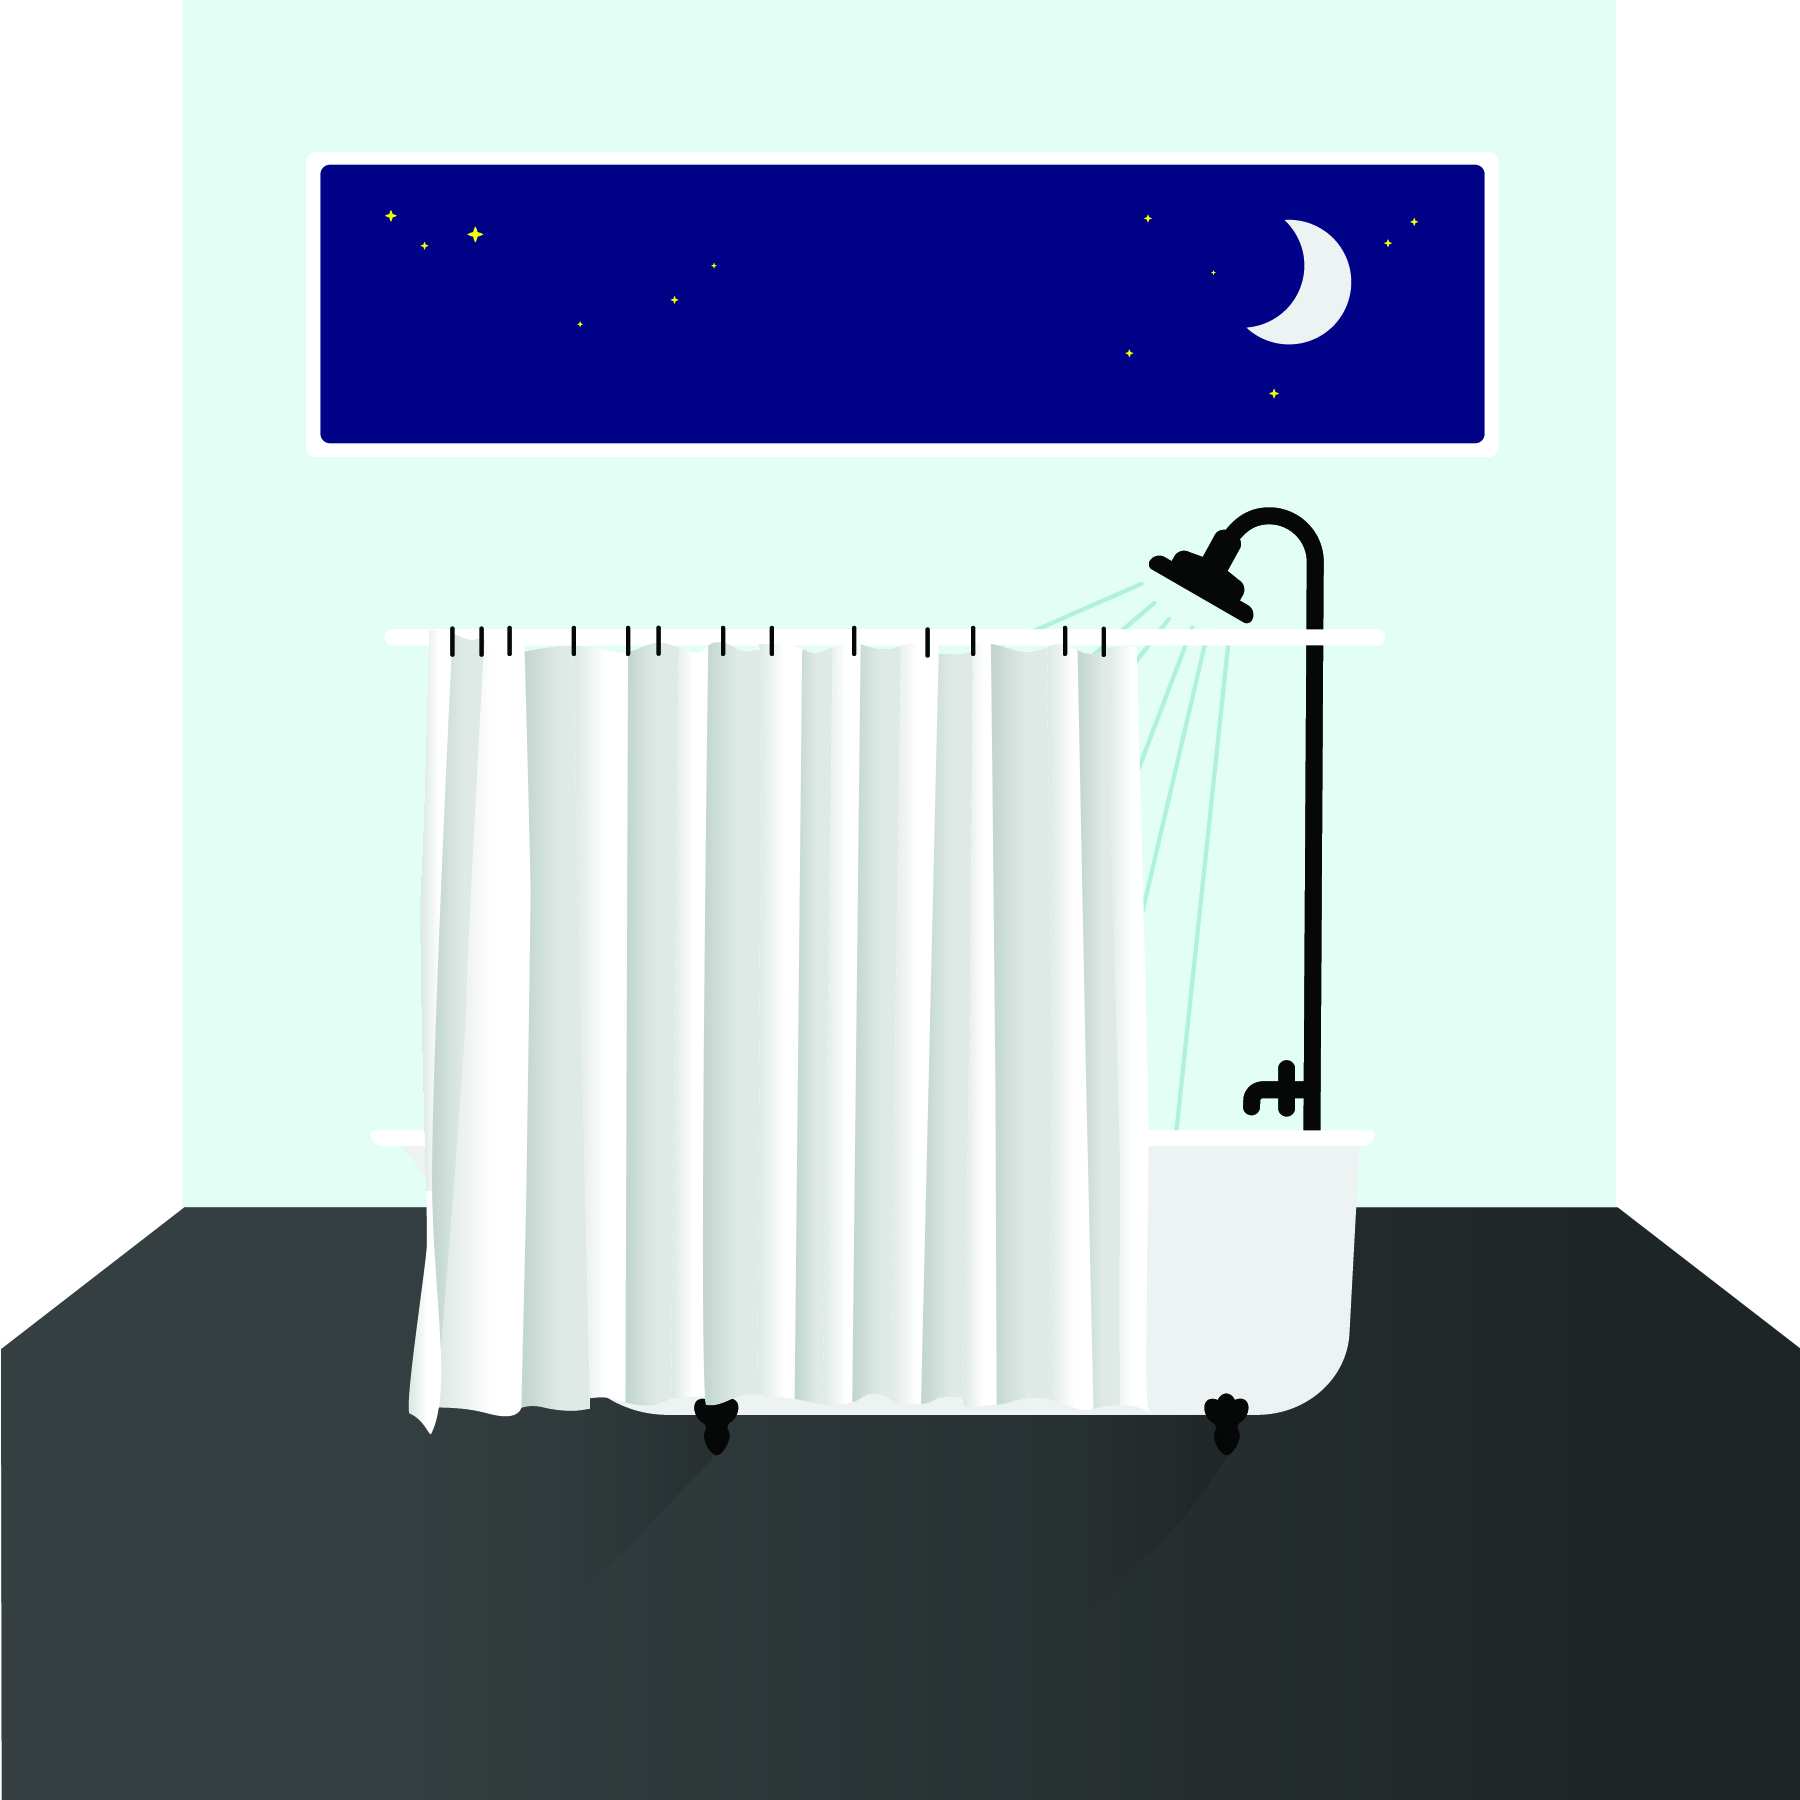 Illustration of a bath tub and shower at nighttime